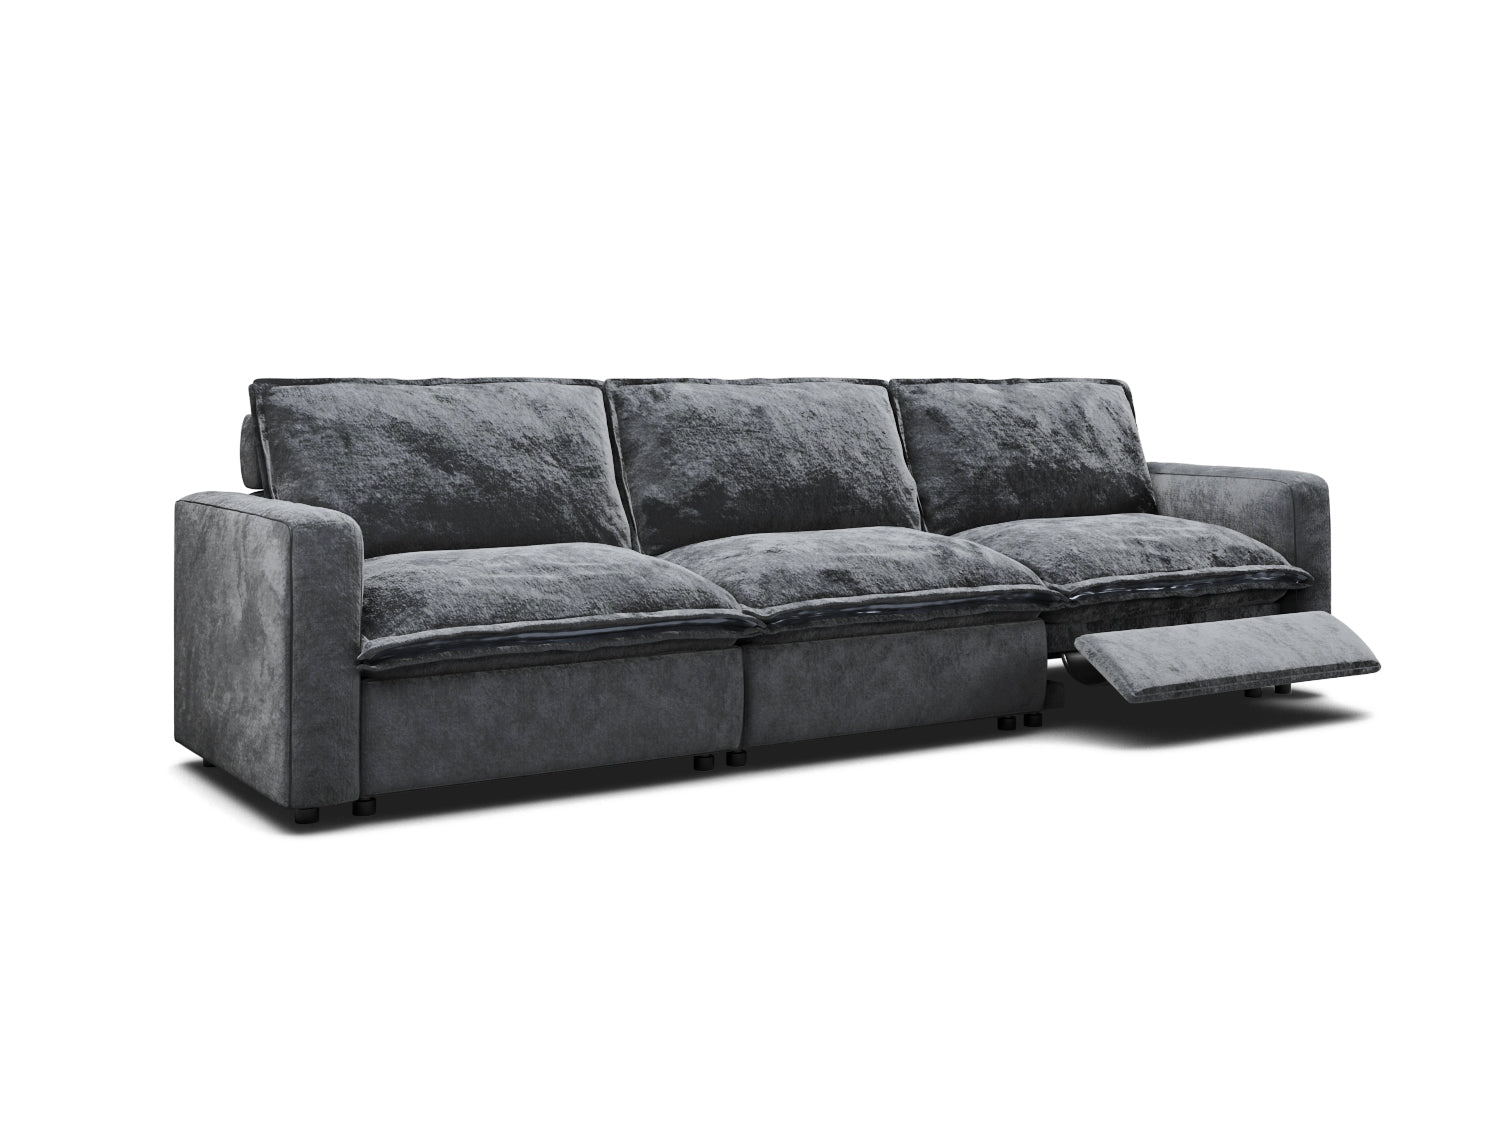 3 seat sectional with 2 recliners in dark grey velvet fabric, modular